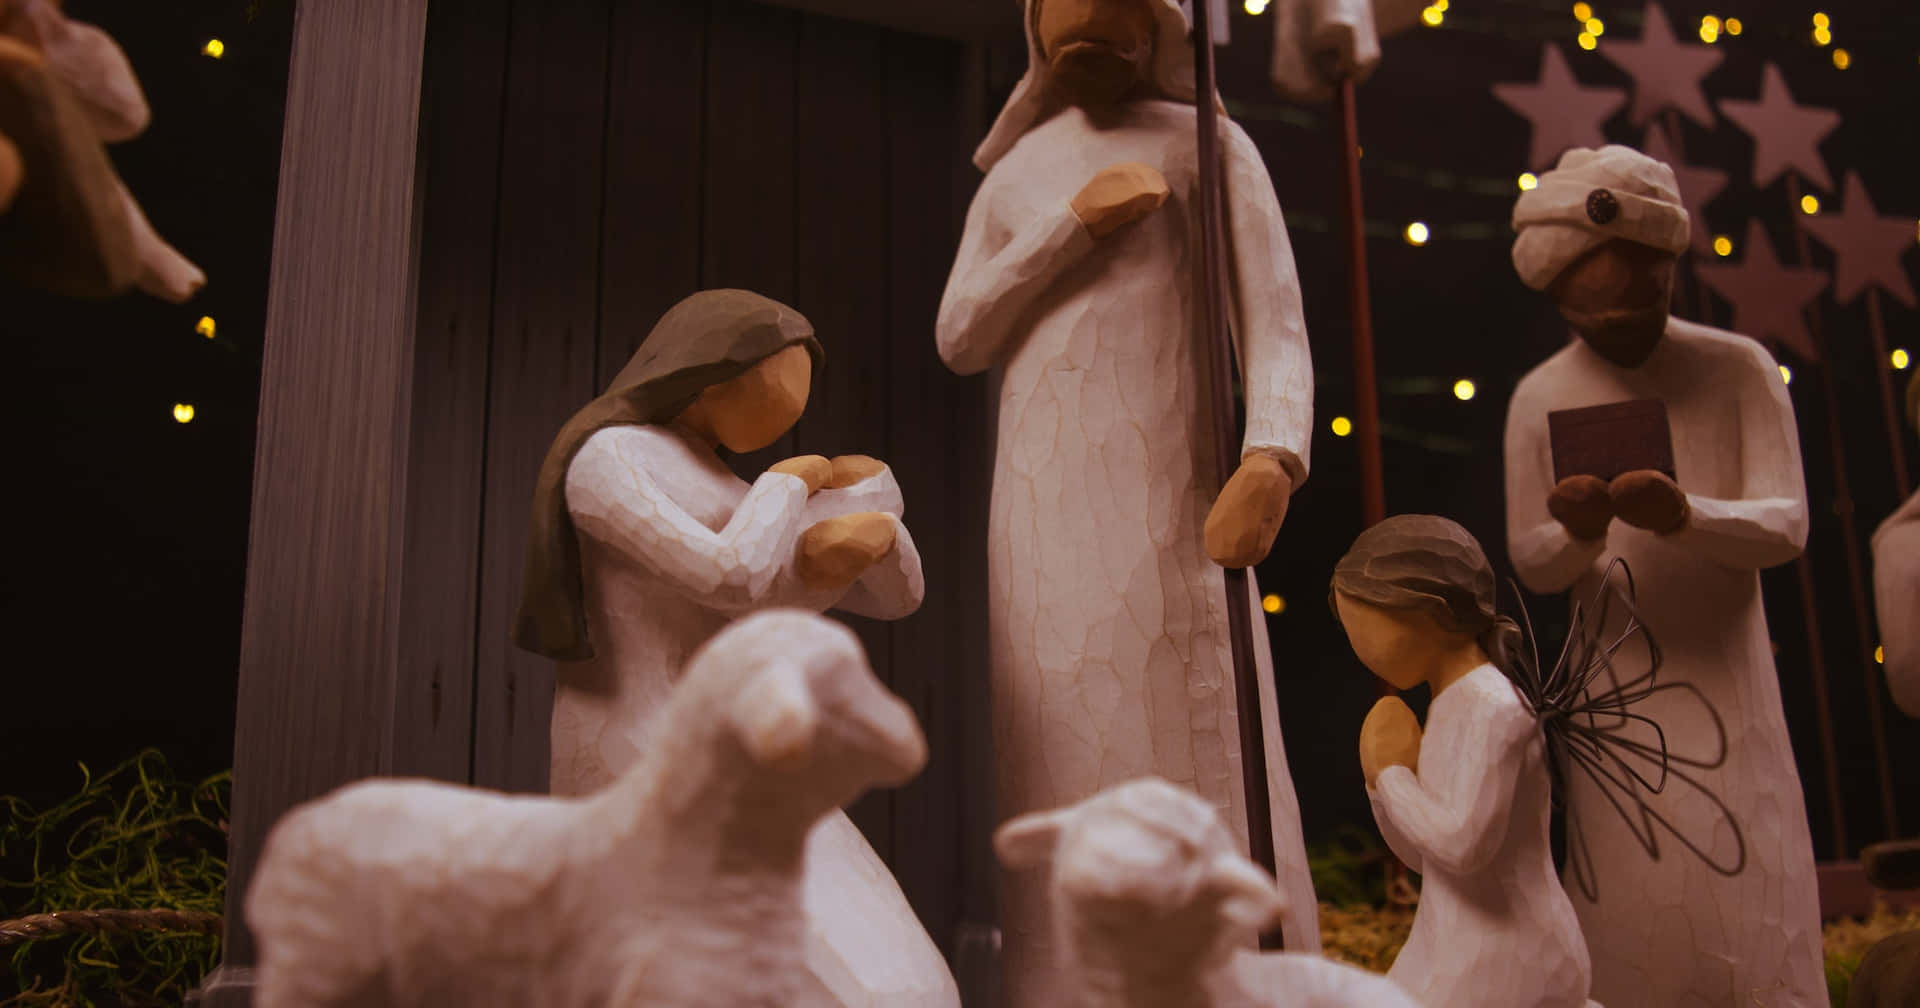 A Nativity Scene That Warms The Heart - Celebrating Christmas"